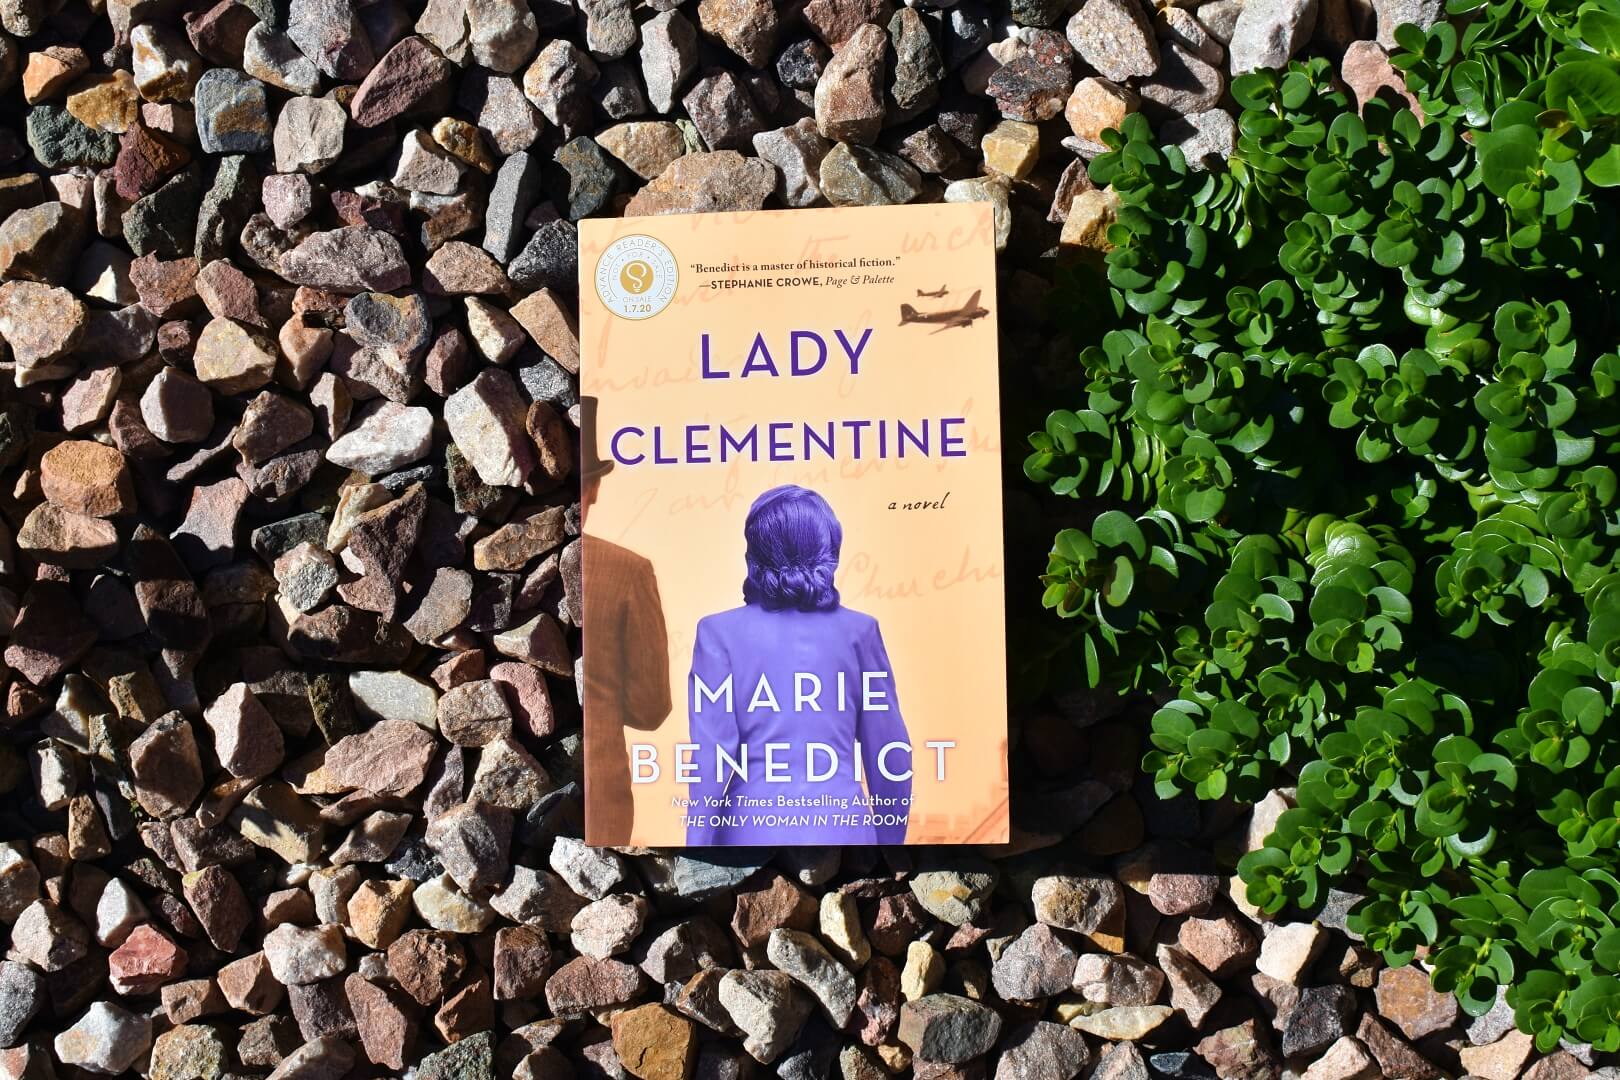 Review: Lady Clementine by Marie Benedict